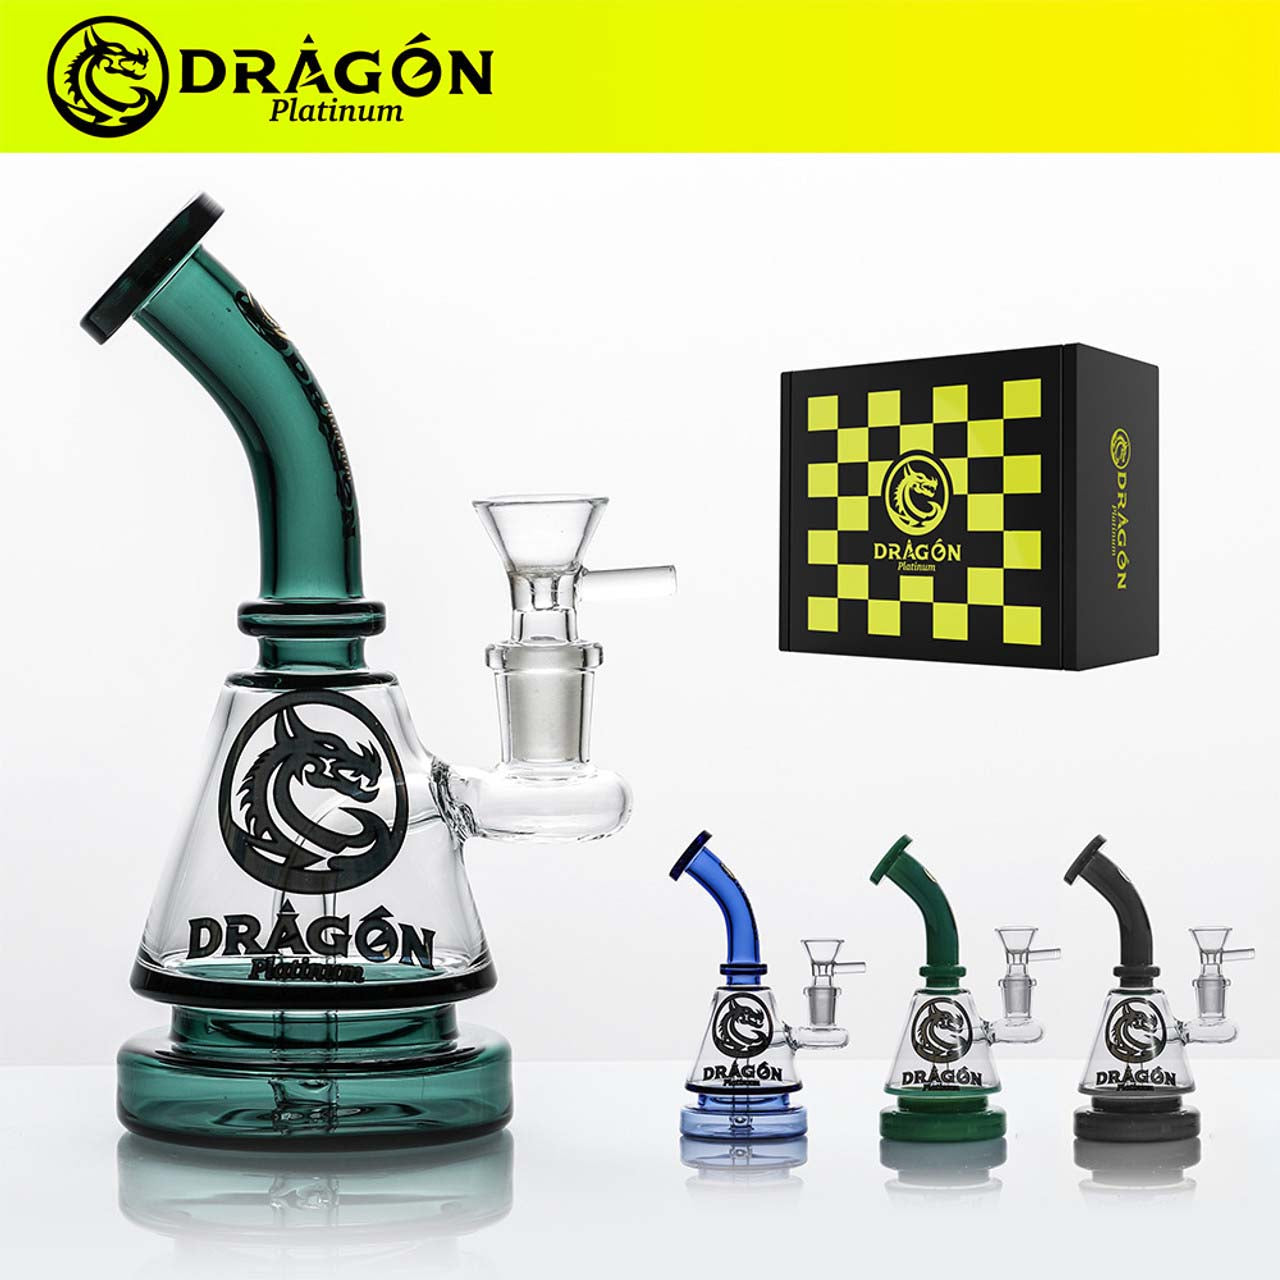 Dragon Platinum Bent Neck Bell Shape Design Hand Water Pipe With Thick Base - 200 Grams - 7.5 Inches - Assorted Colors [WPE-015]